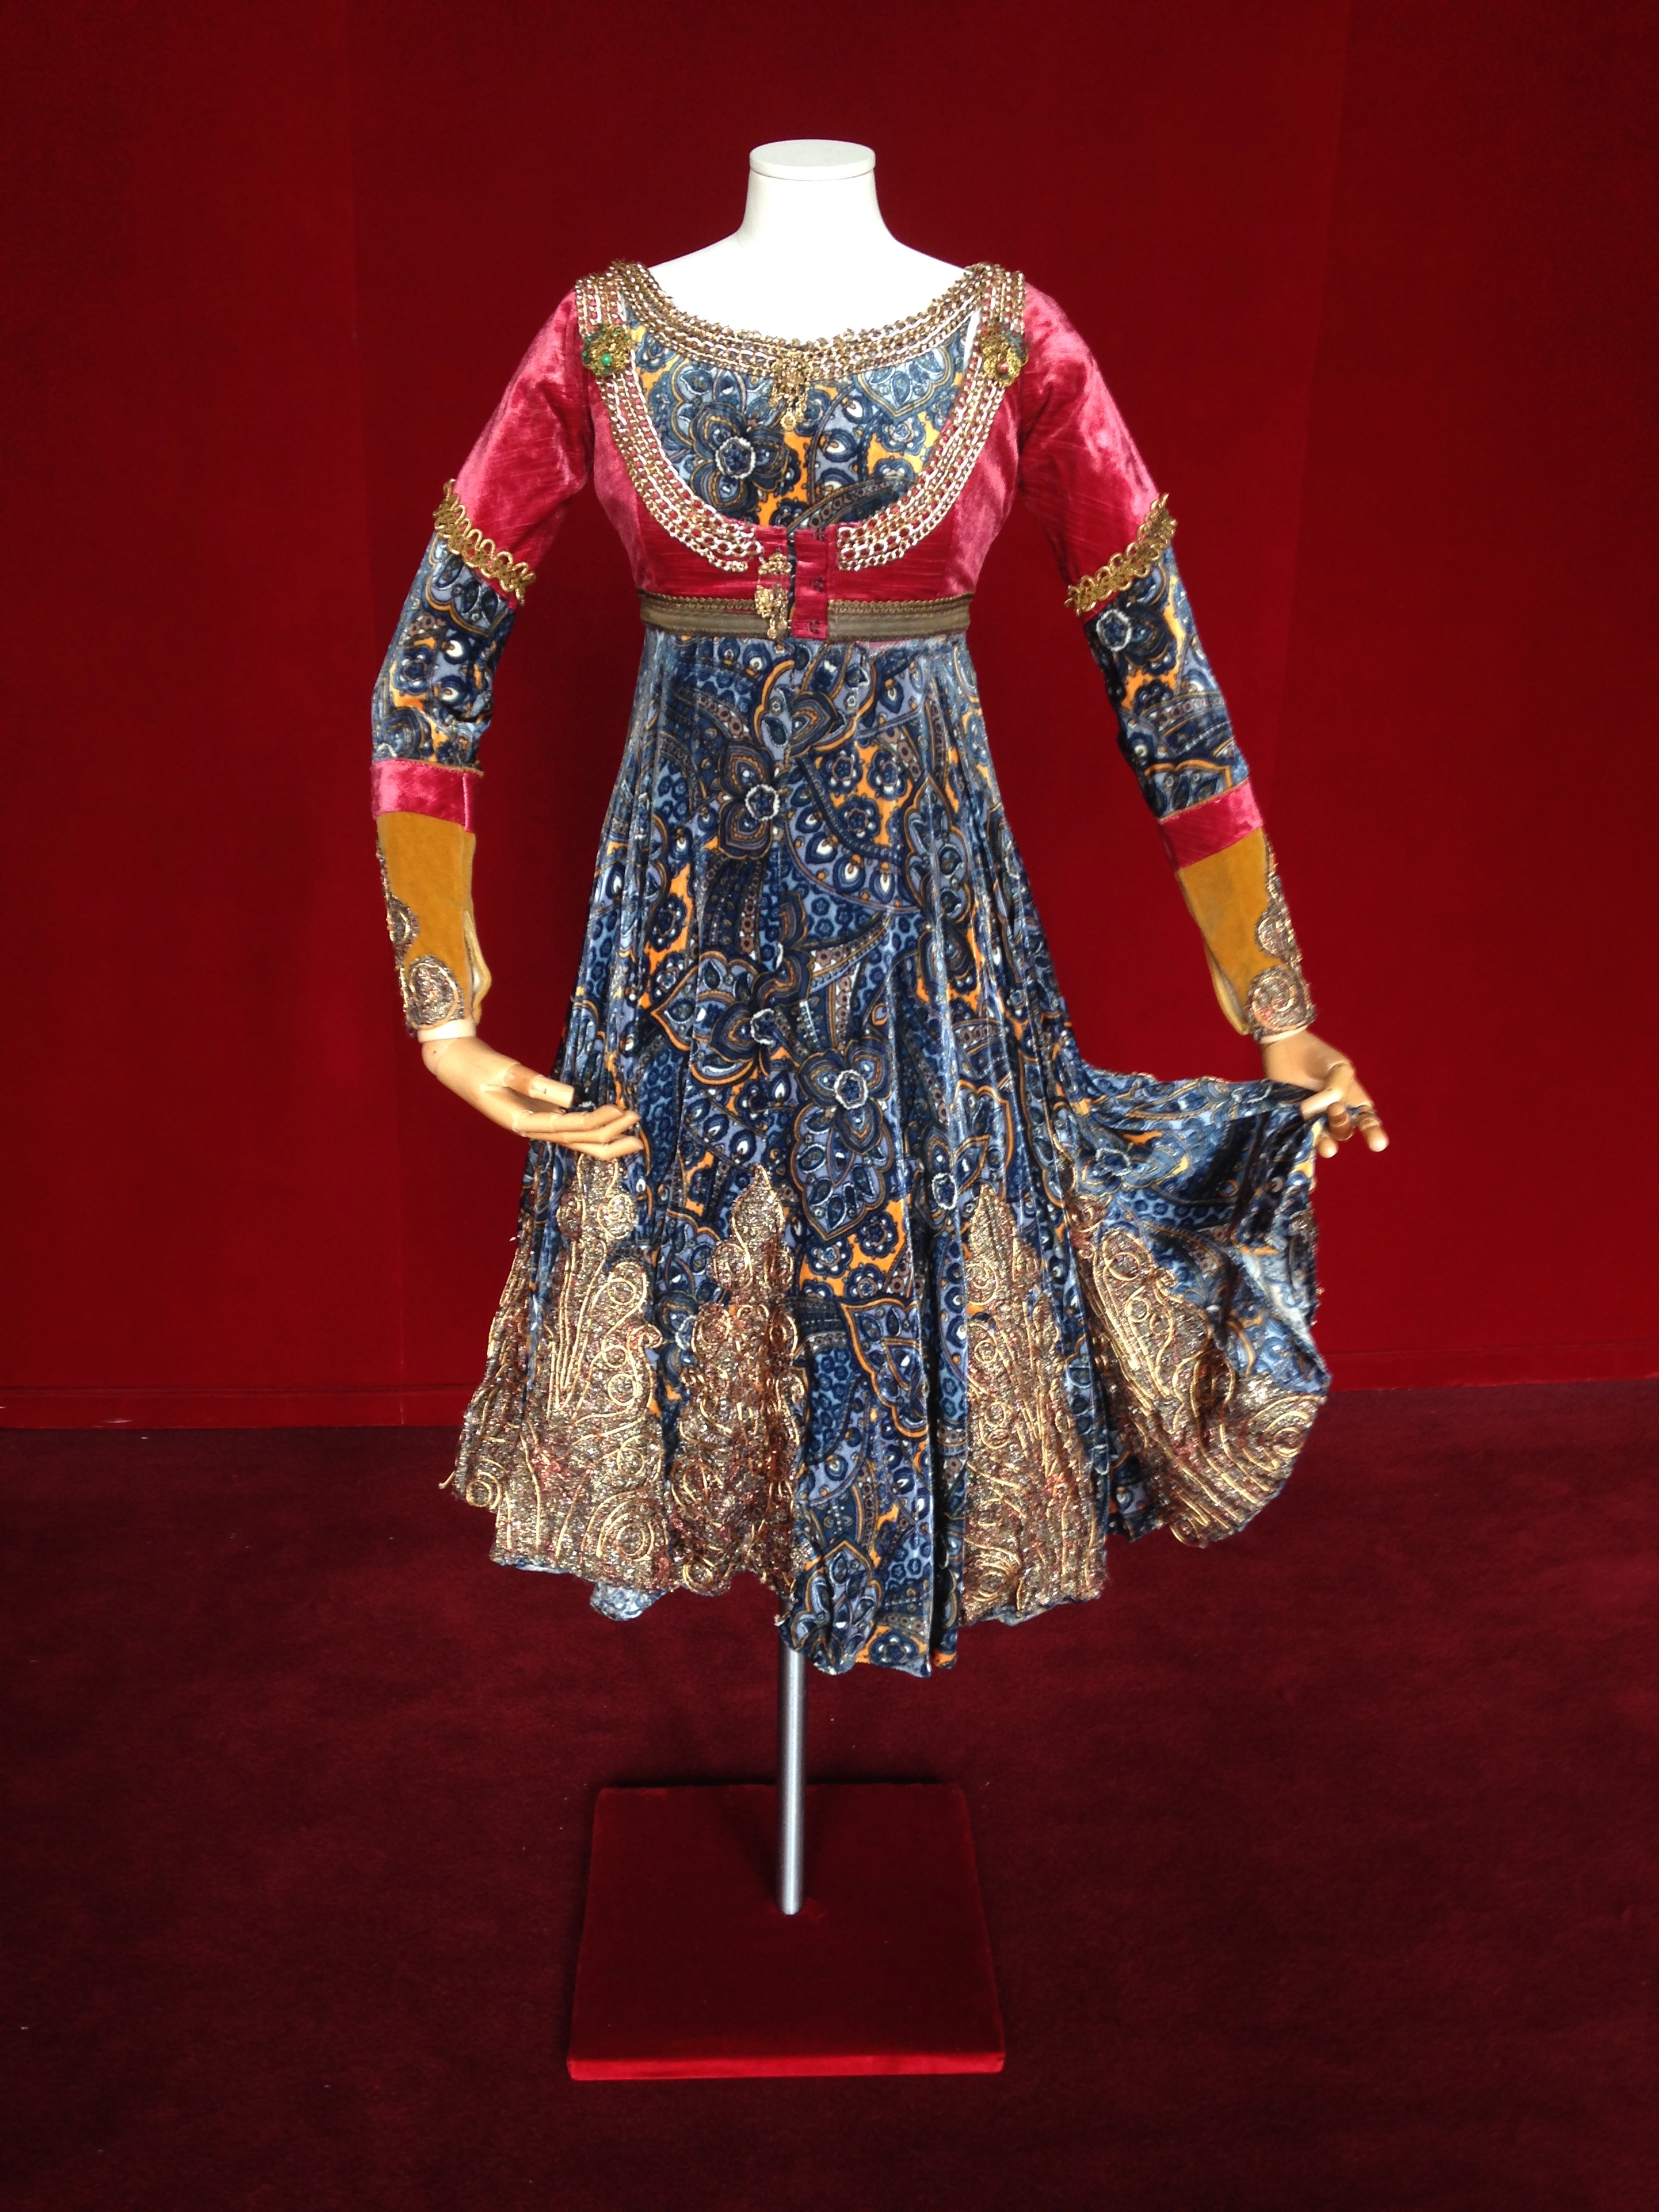 Ballet Costume mounted on an articulated dress form